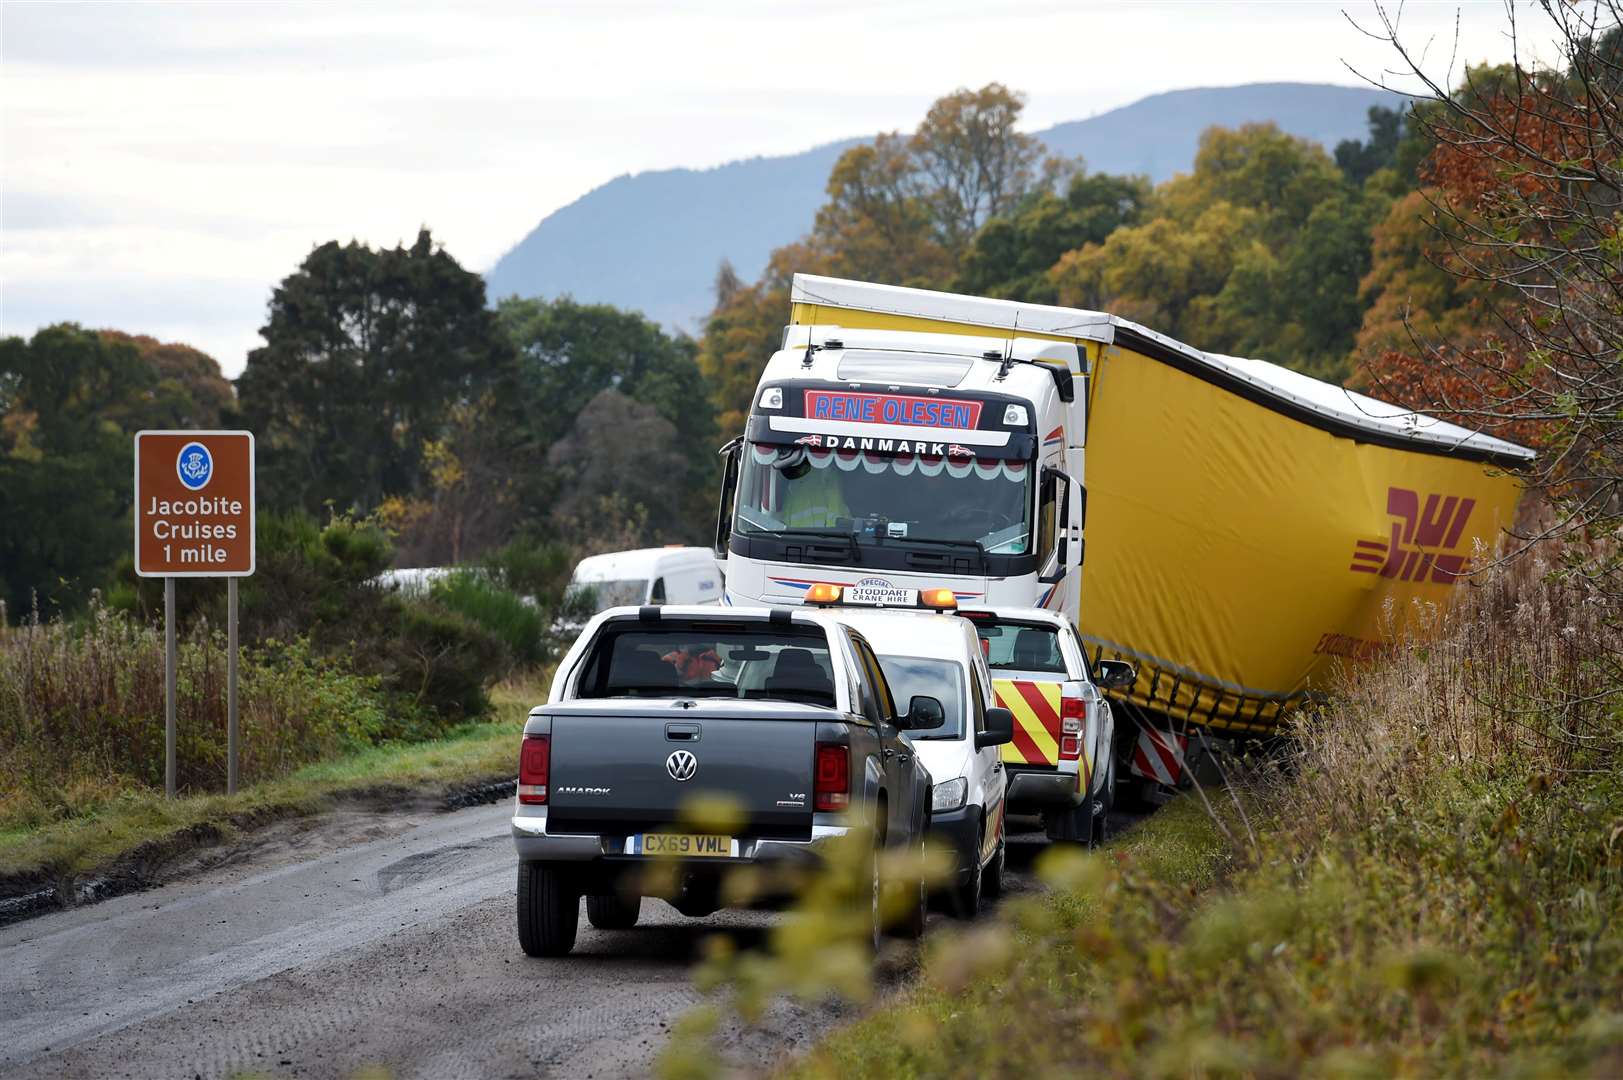 The lorry overturned on the A82, closing the road in both directions.